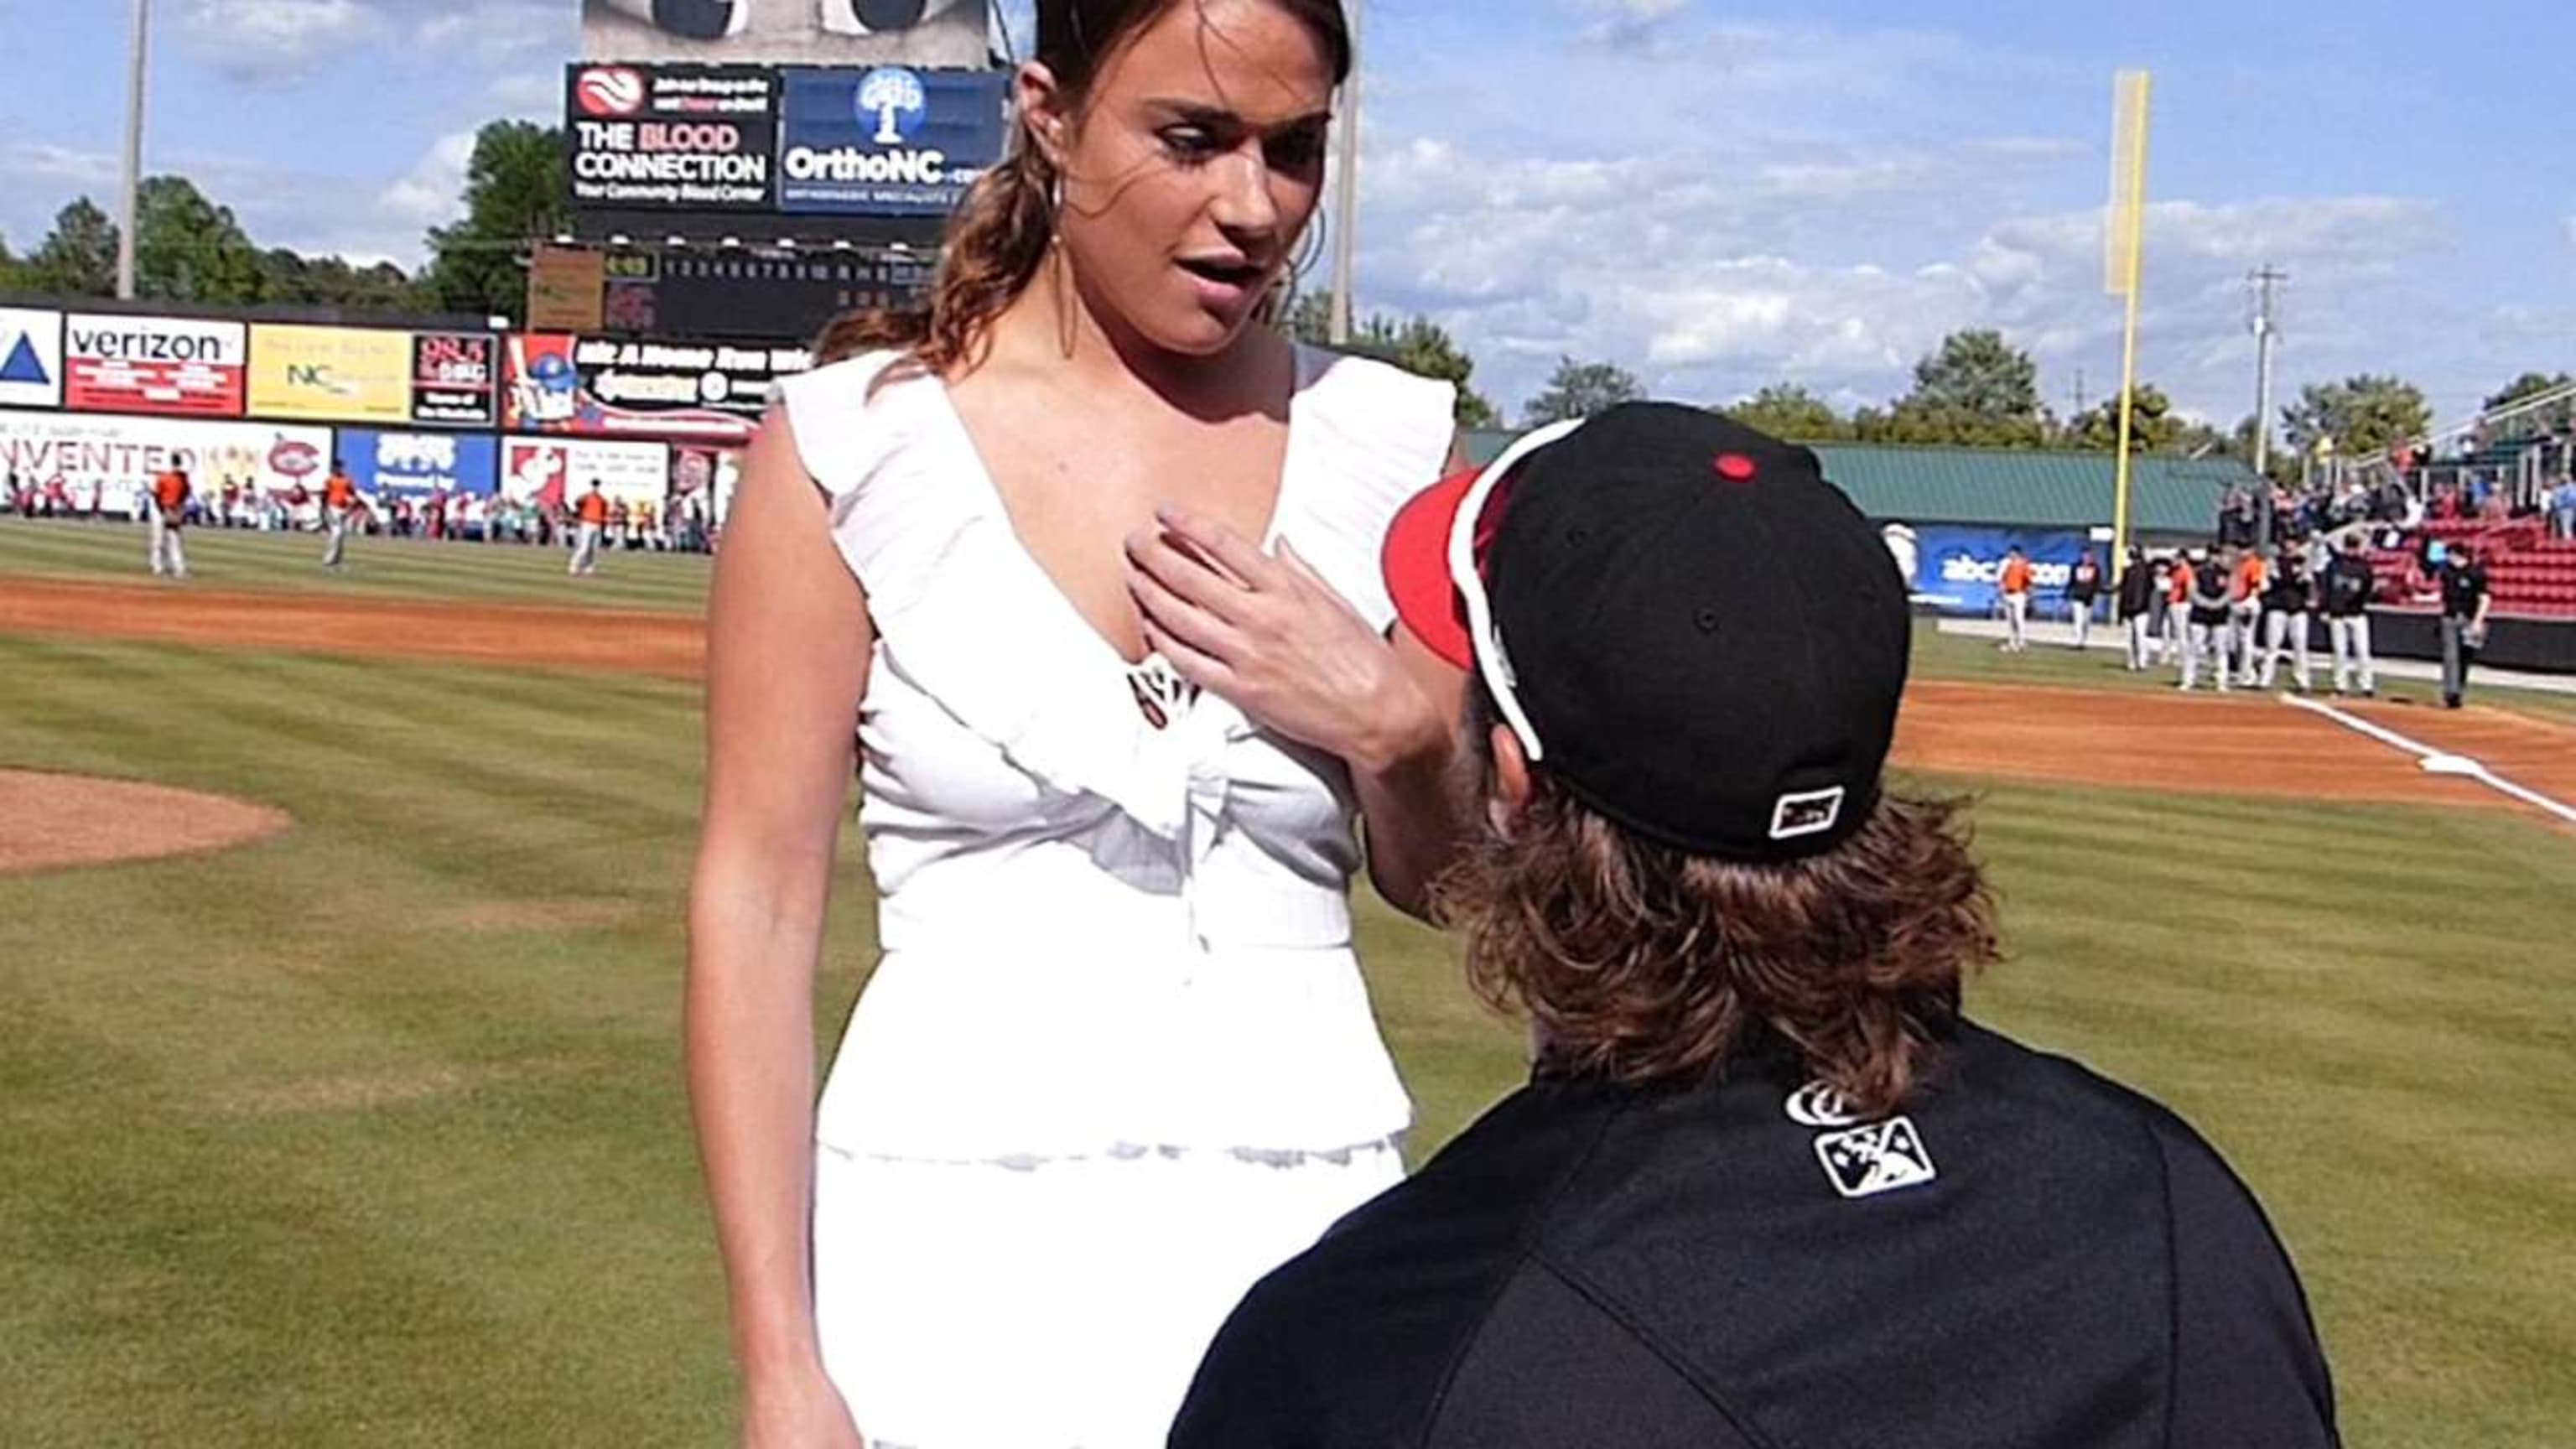 Baseball Wives: Photo List of the Hottest MLB Wives and Girlfriends